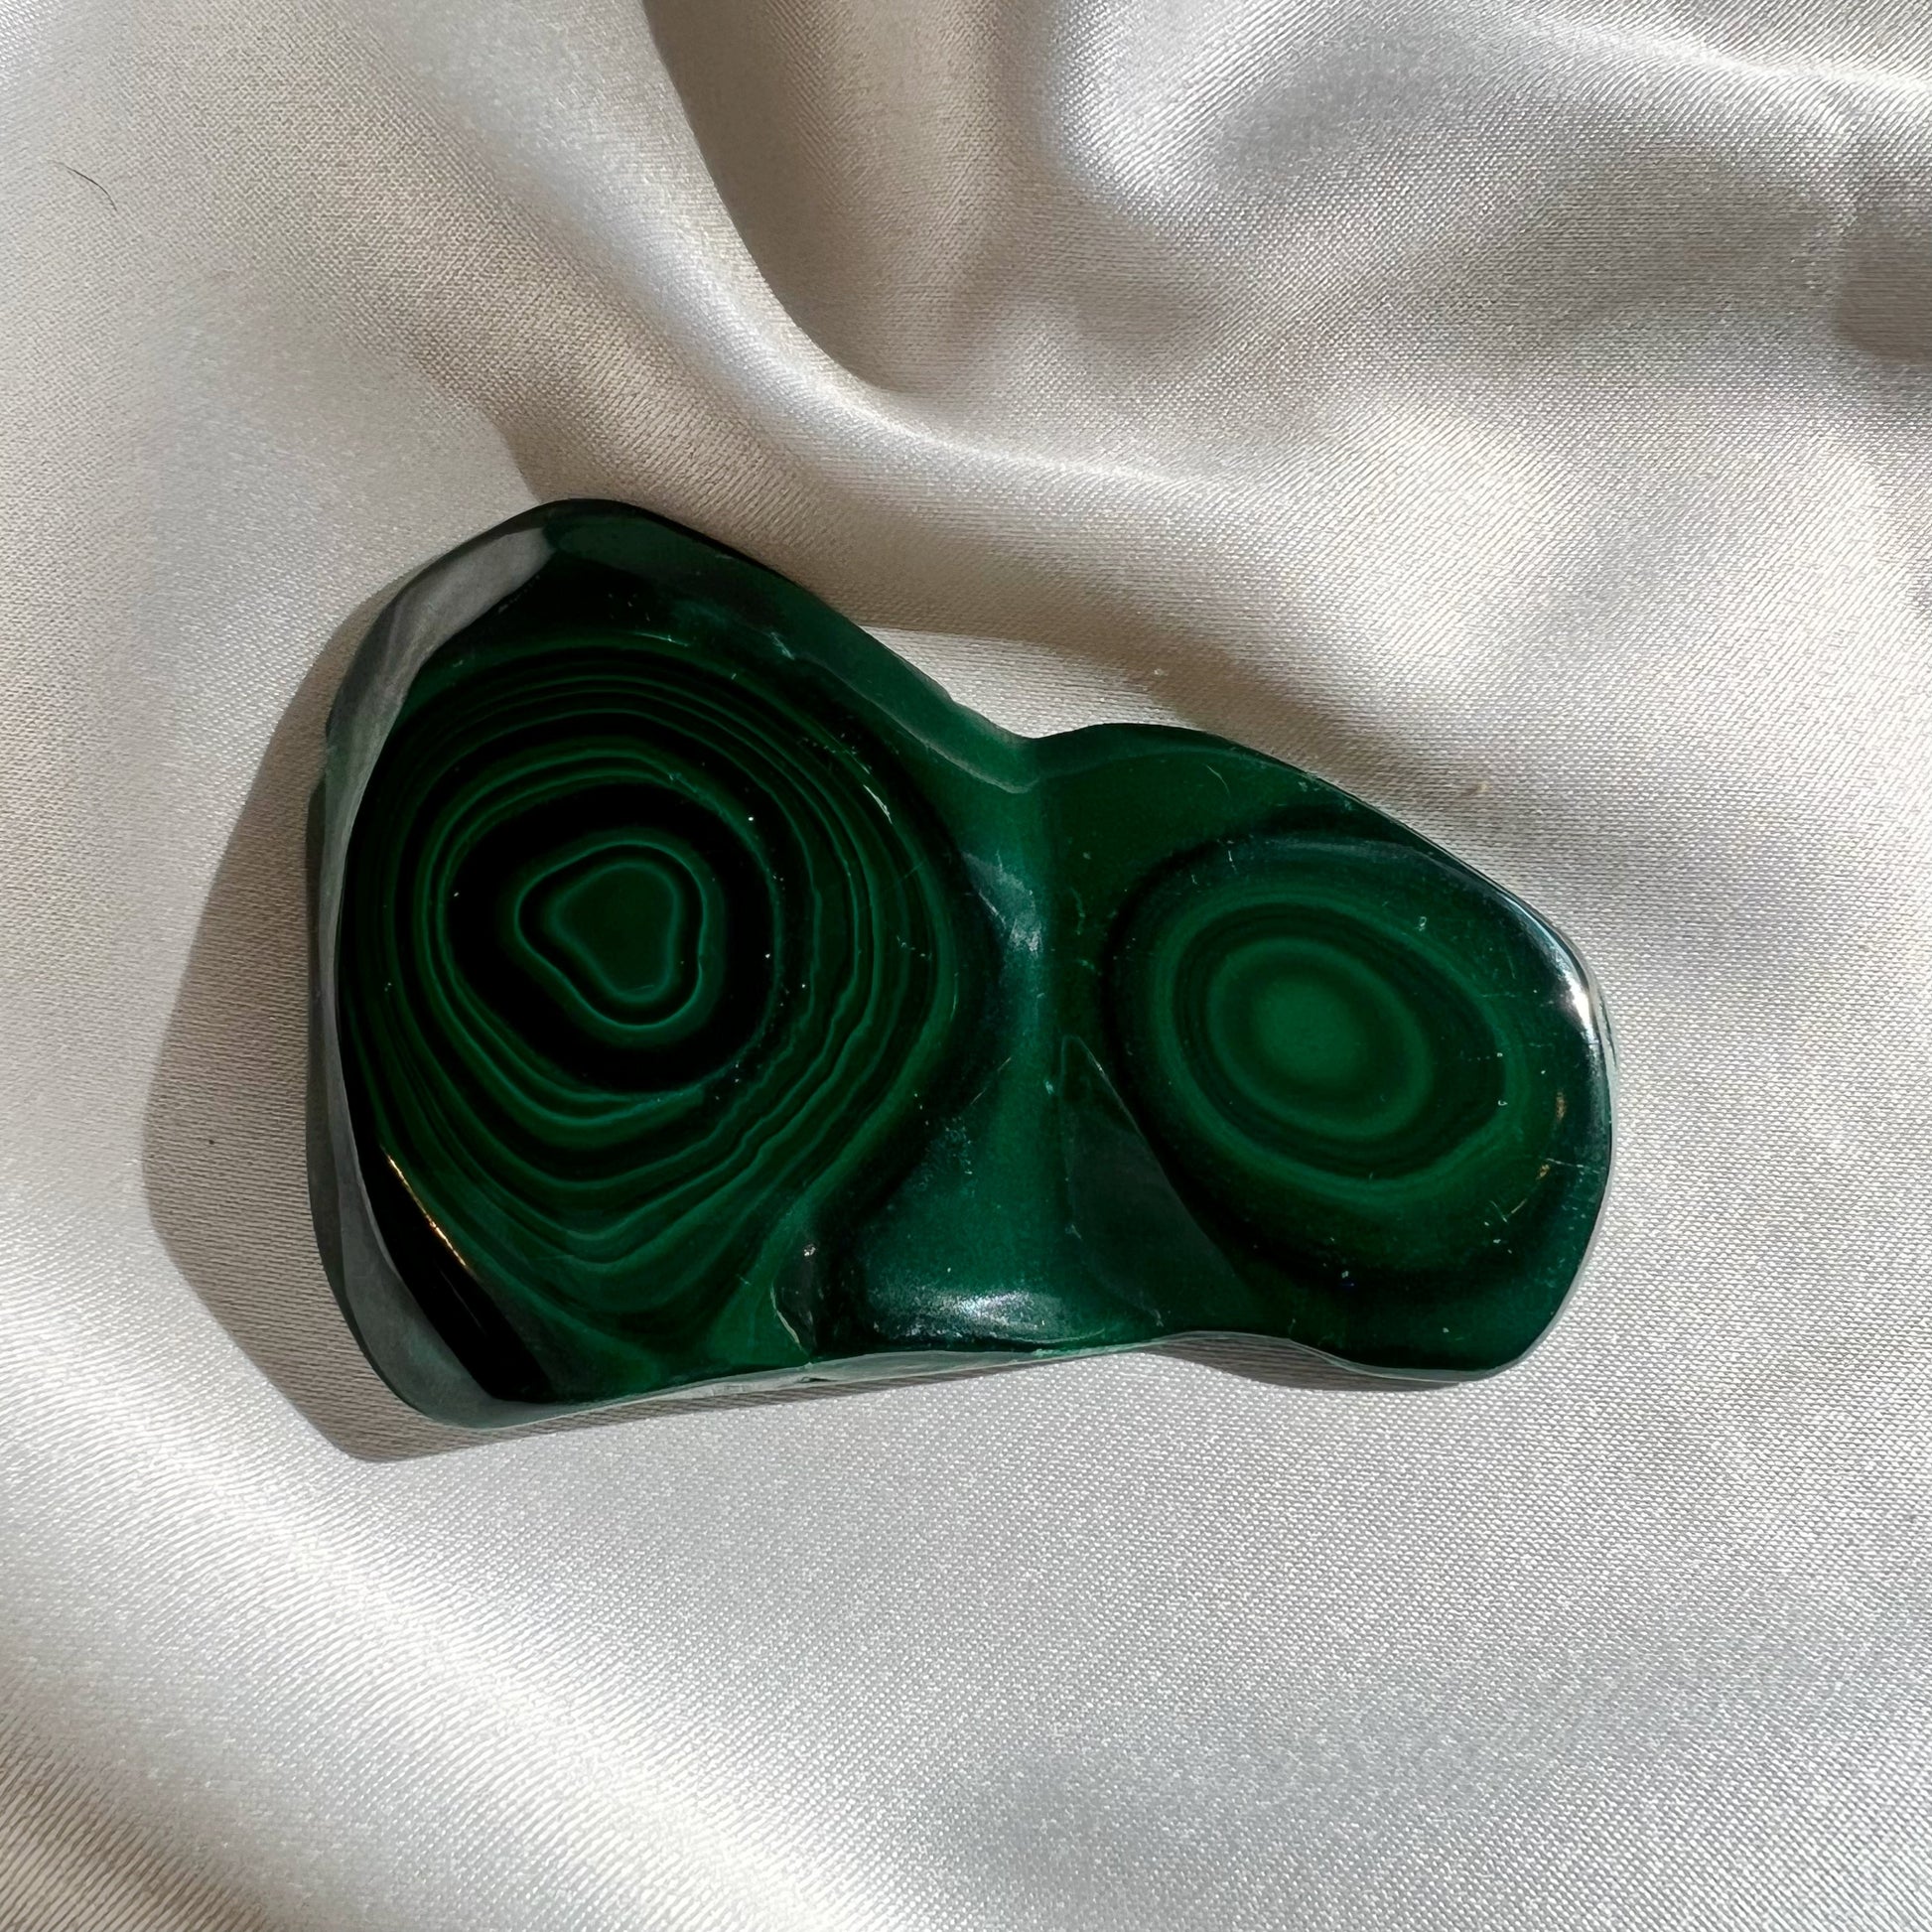 This listing is for one (1) Malachite Slab.  Known as the stone of transformation, Malachite helps bring energy and focus to new growth while pruning off the brambles holding you back. Malachite reminds us to turn over a new leaf. If you’re drawn to the vibrant Malachite crystal, it could mean that it’s time for a change.  Origin: Russia  Slab 1:  3.5in by 2.45in, .095kg